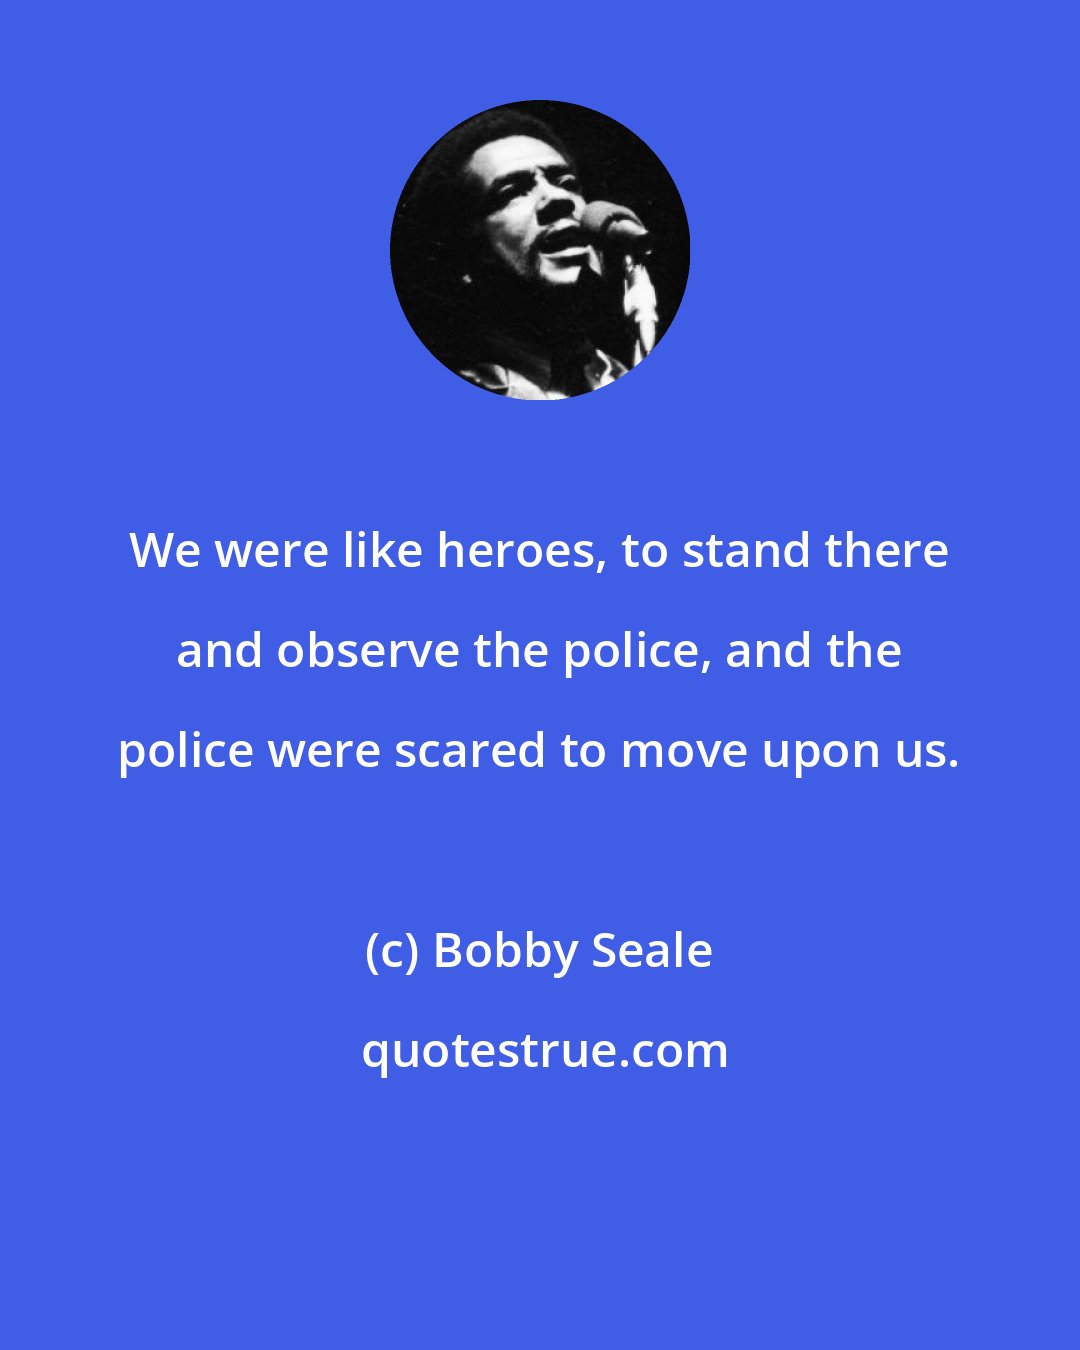 Bobby Seale: We were like heroes, to stand there and observe the police, and the police were scared to move upon us.